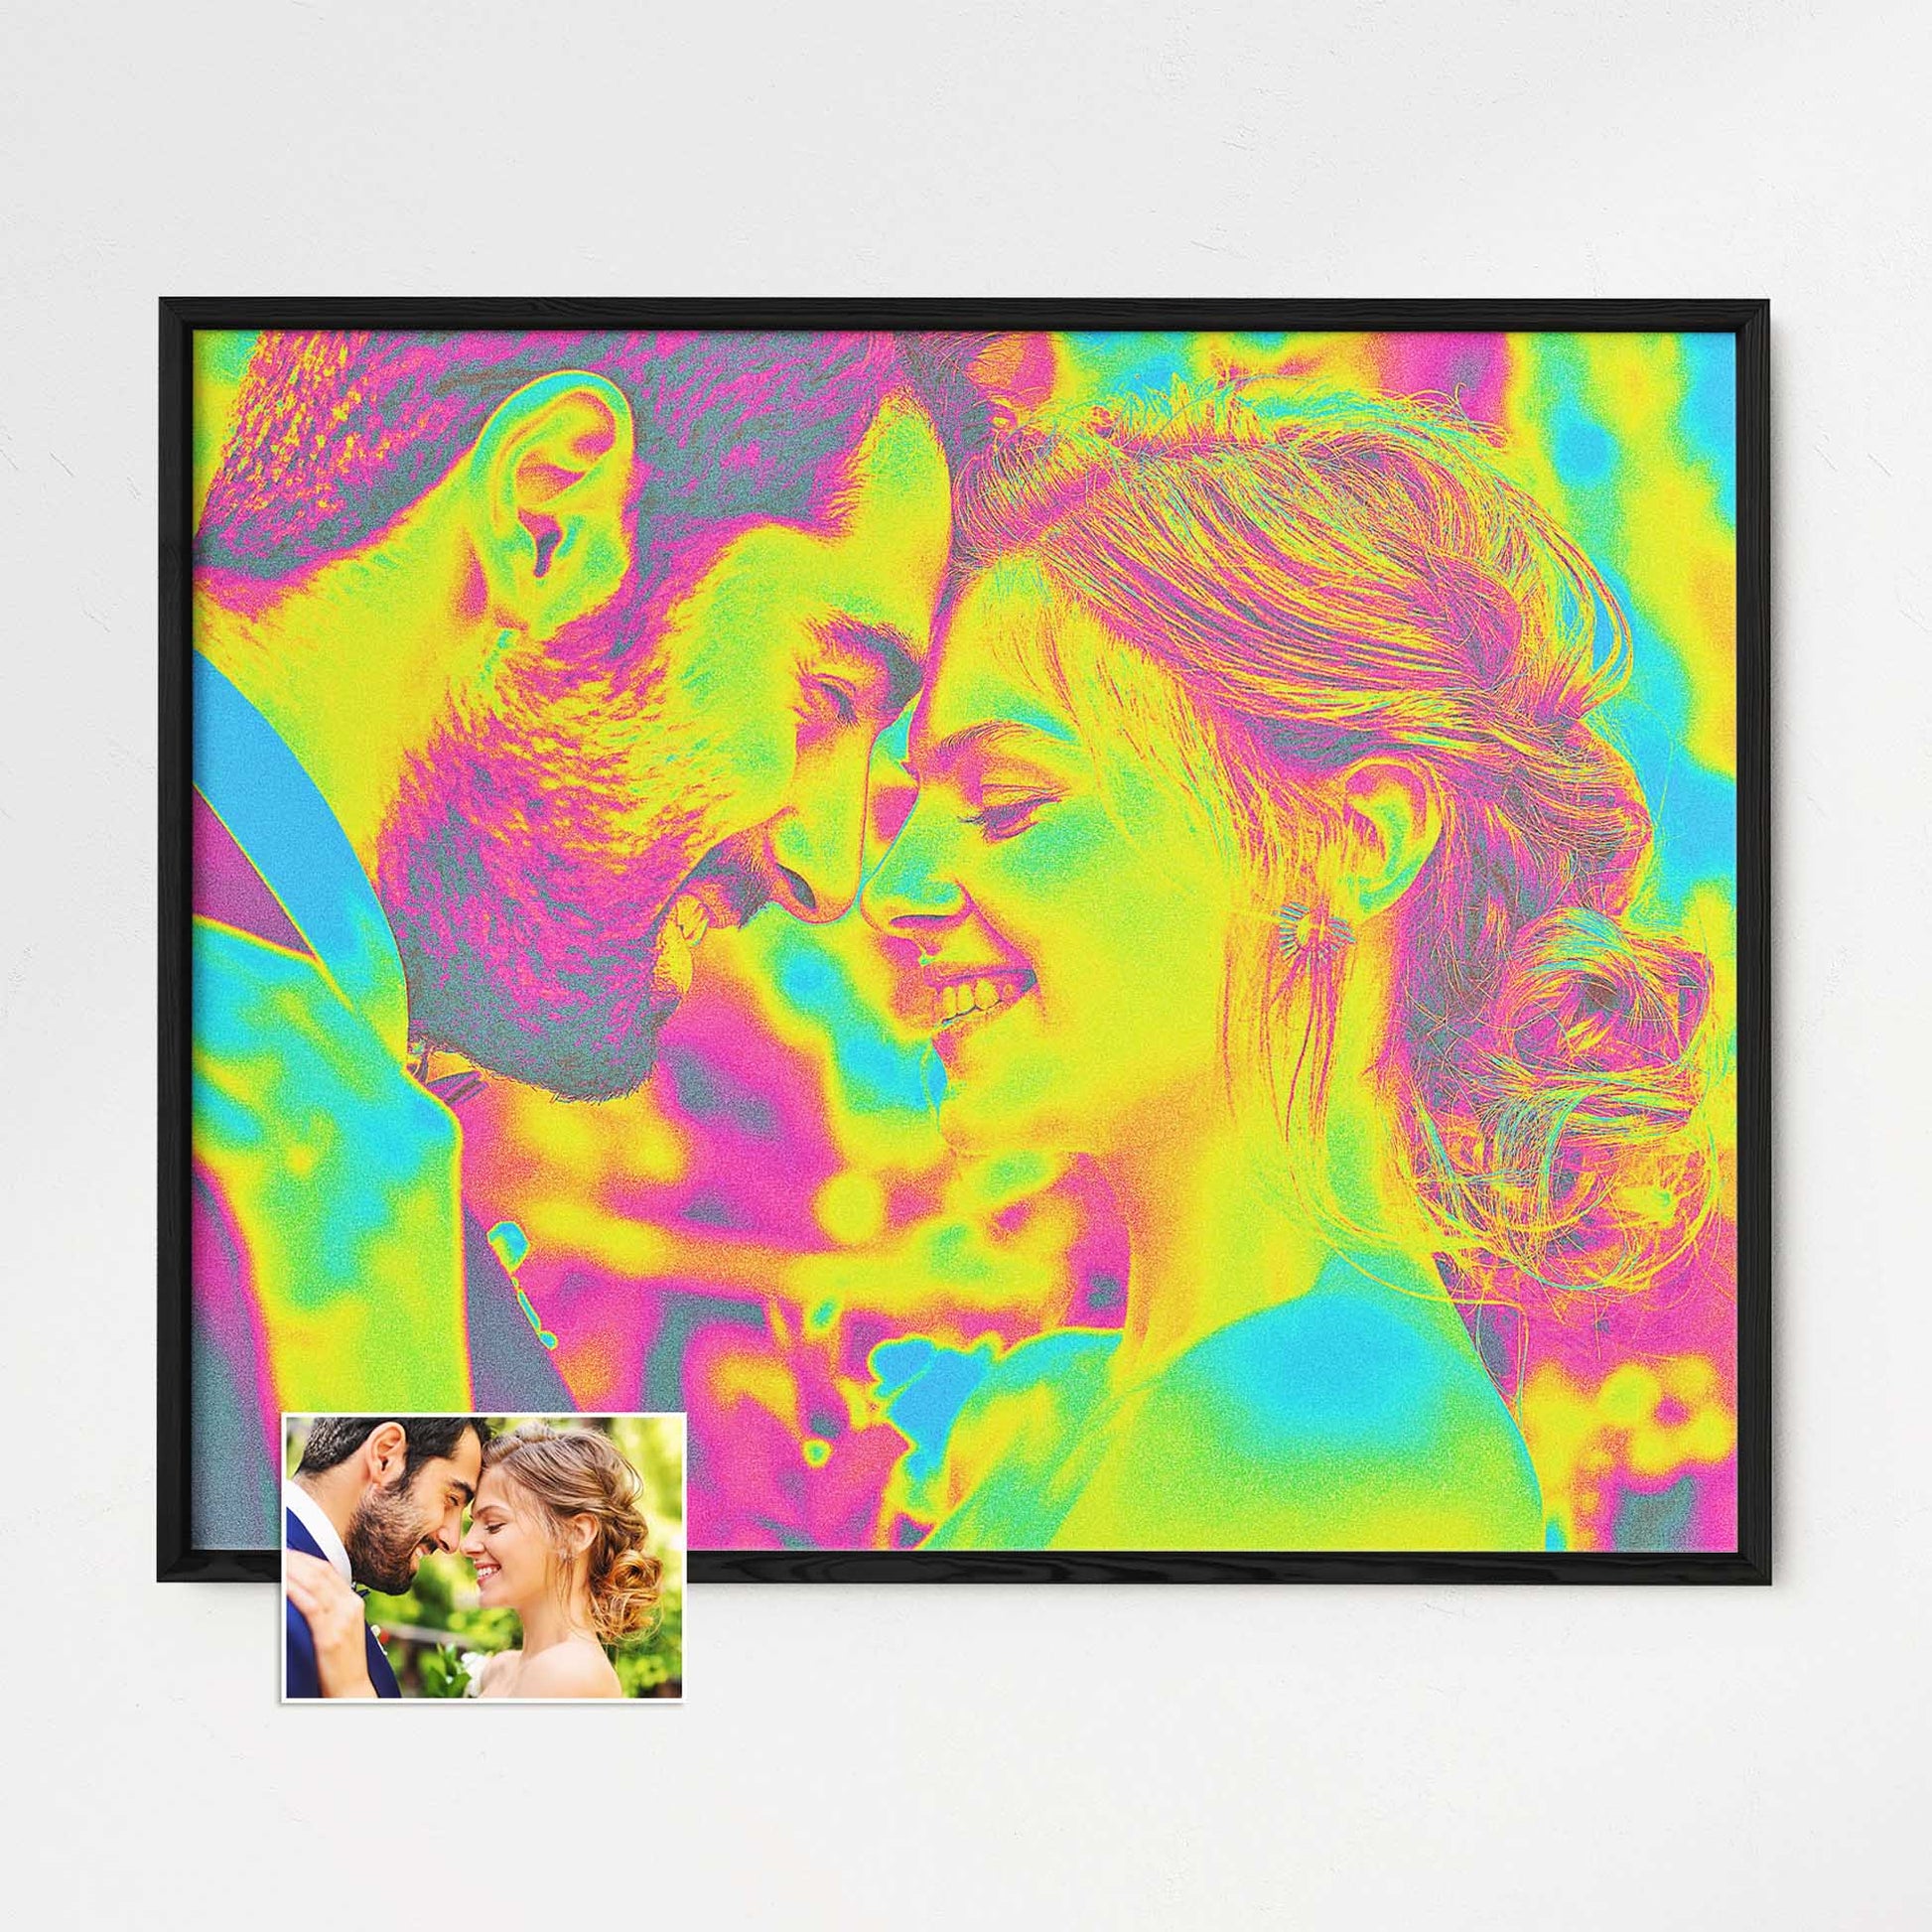 Personalised Acid Trip Framed Print is a stunning piece of fine digital art that makes a bold statement. Its colorful and vivid design brings your photo to life with sharp details and vibrant hues. Printed on thick paper and framed 